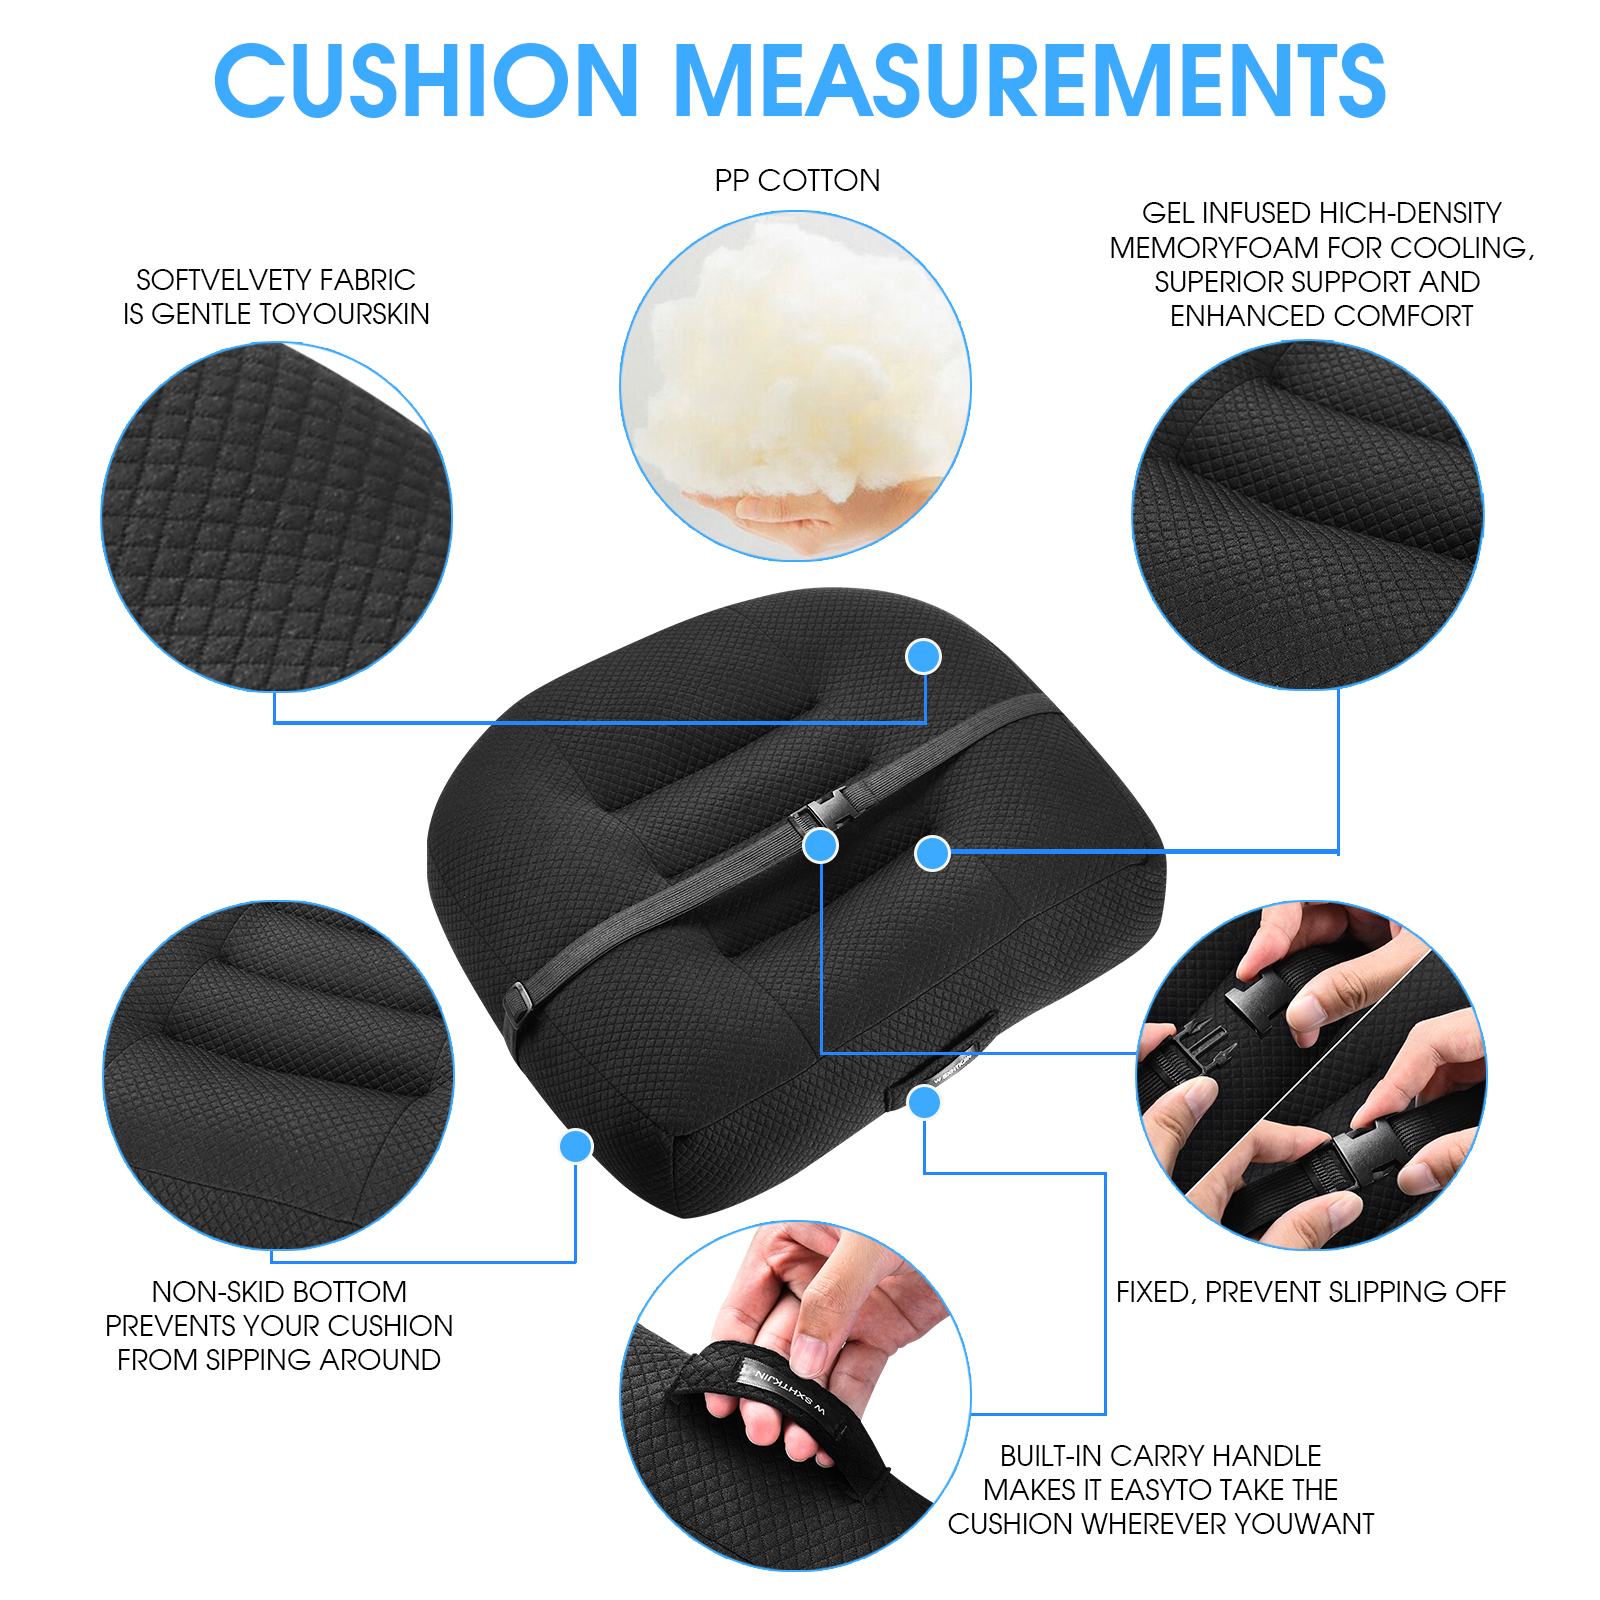 Tohuu Car Booster Cushion Adult Seat Booster Car Memory Foam Car Cushion  For Truck Driver Short People Office Chair Wheelchair Plane competent 